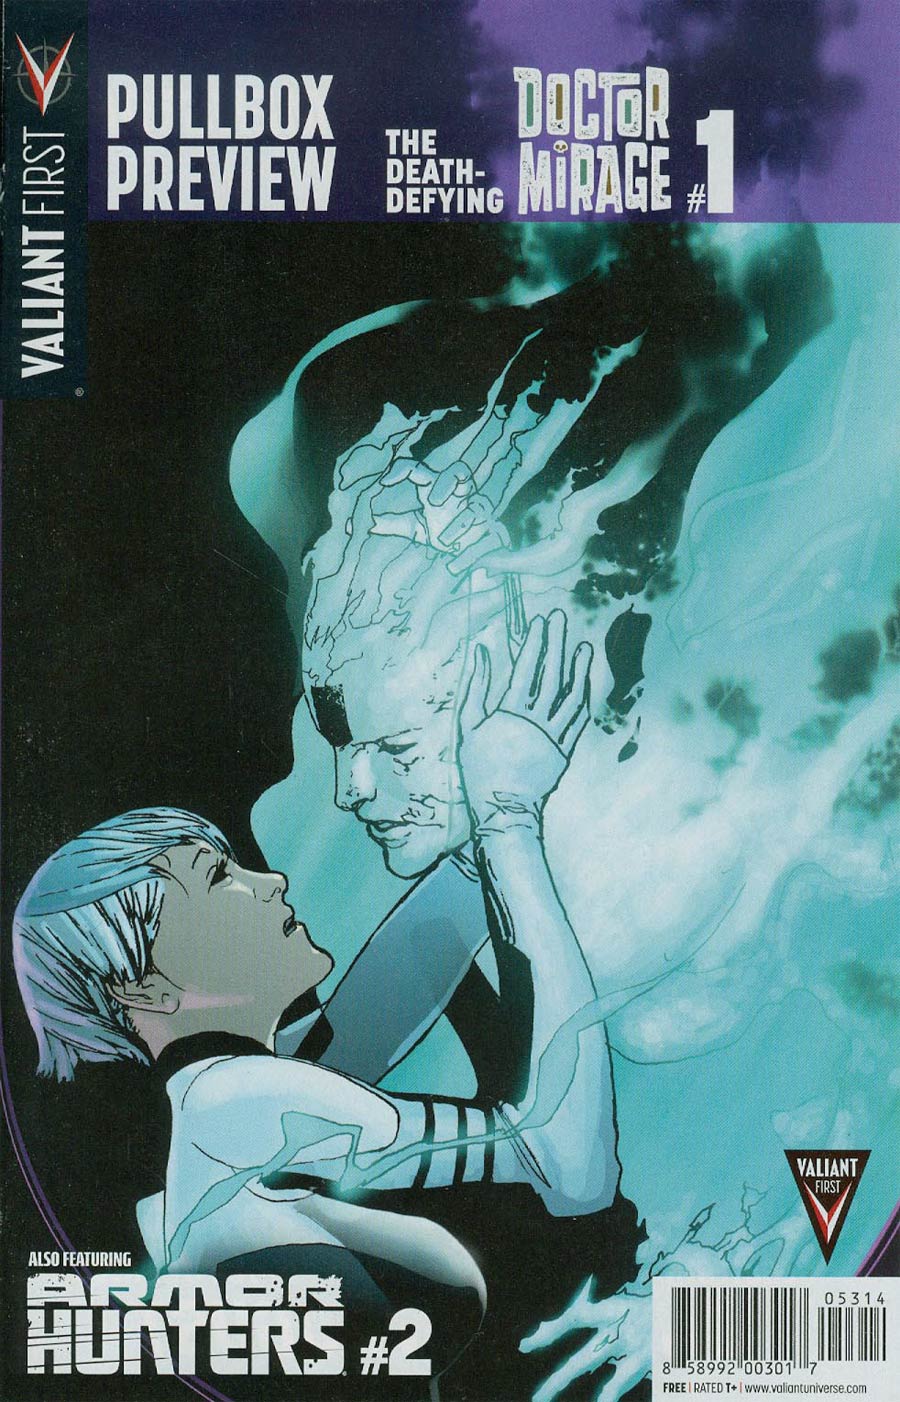 Valiant First Pullbox Preview - Death-Defying Doctor Mirage #1